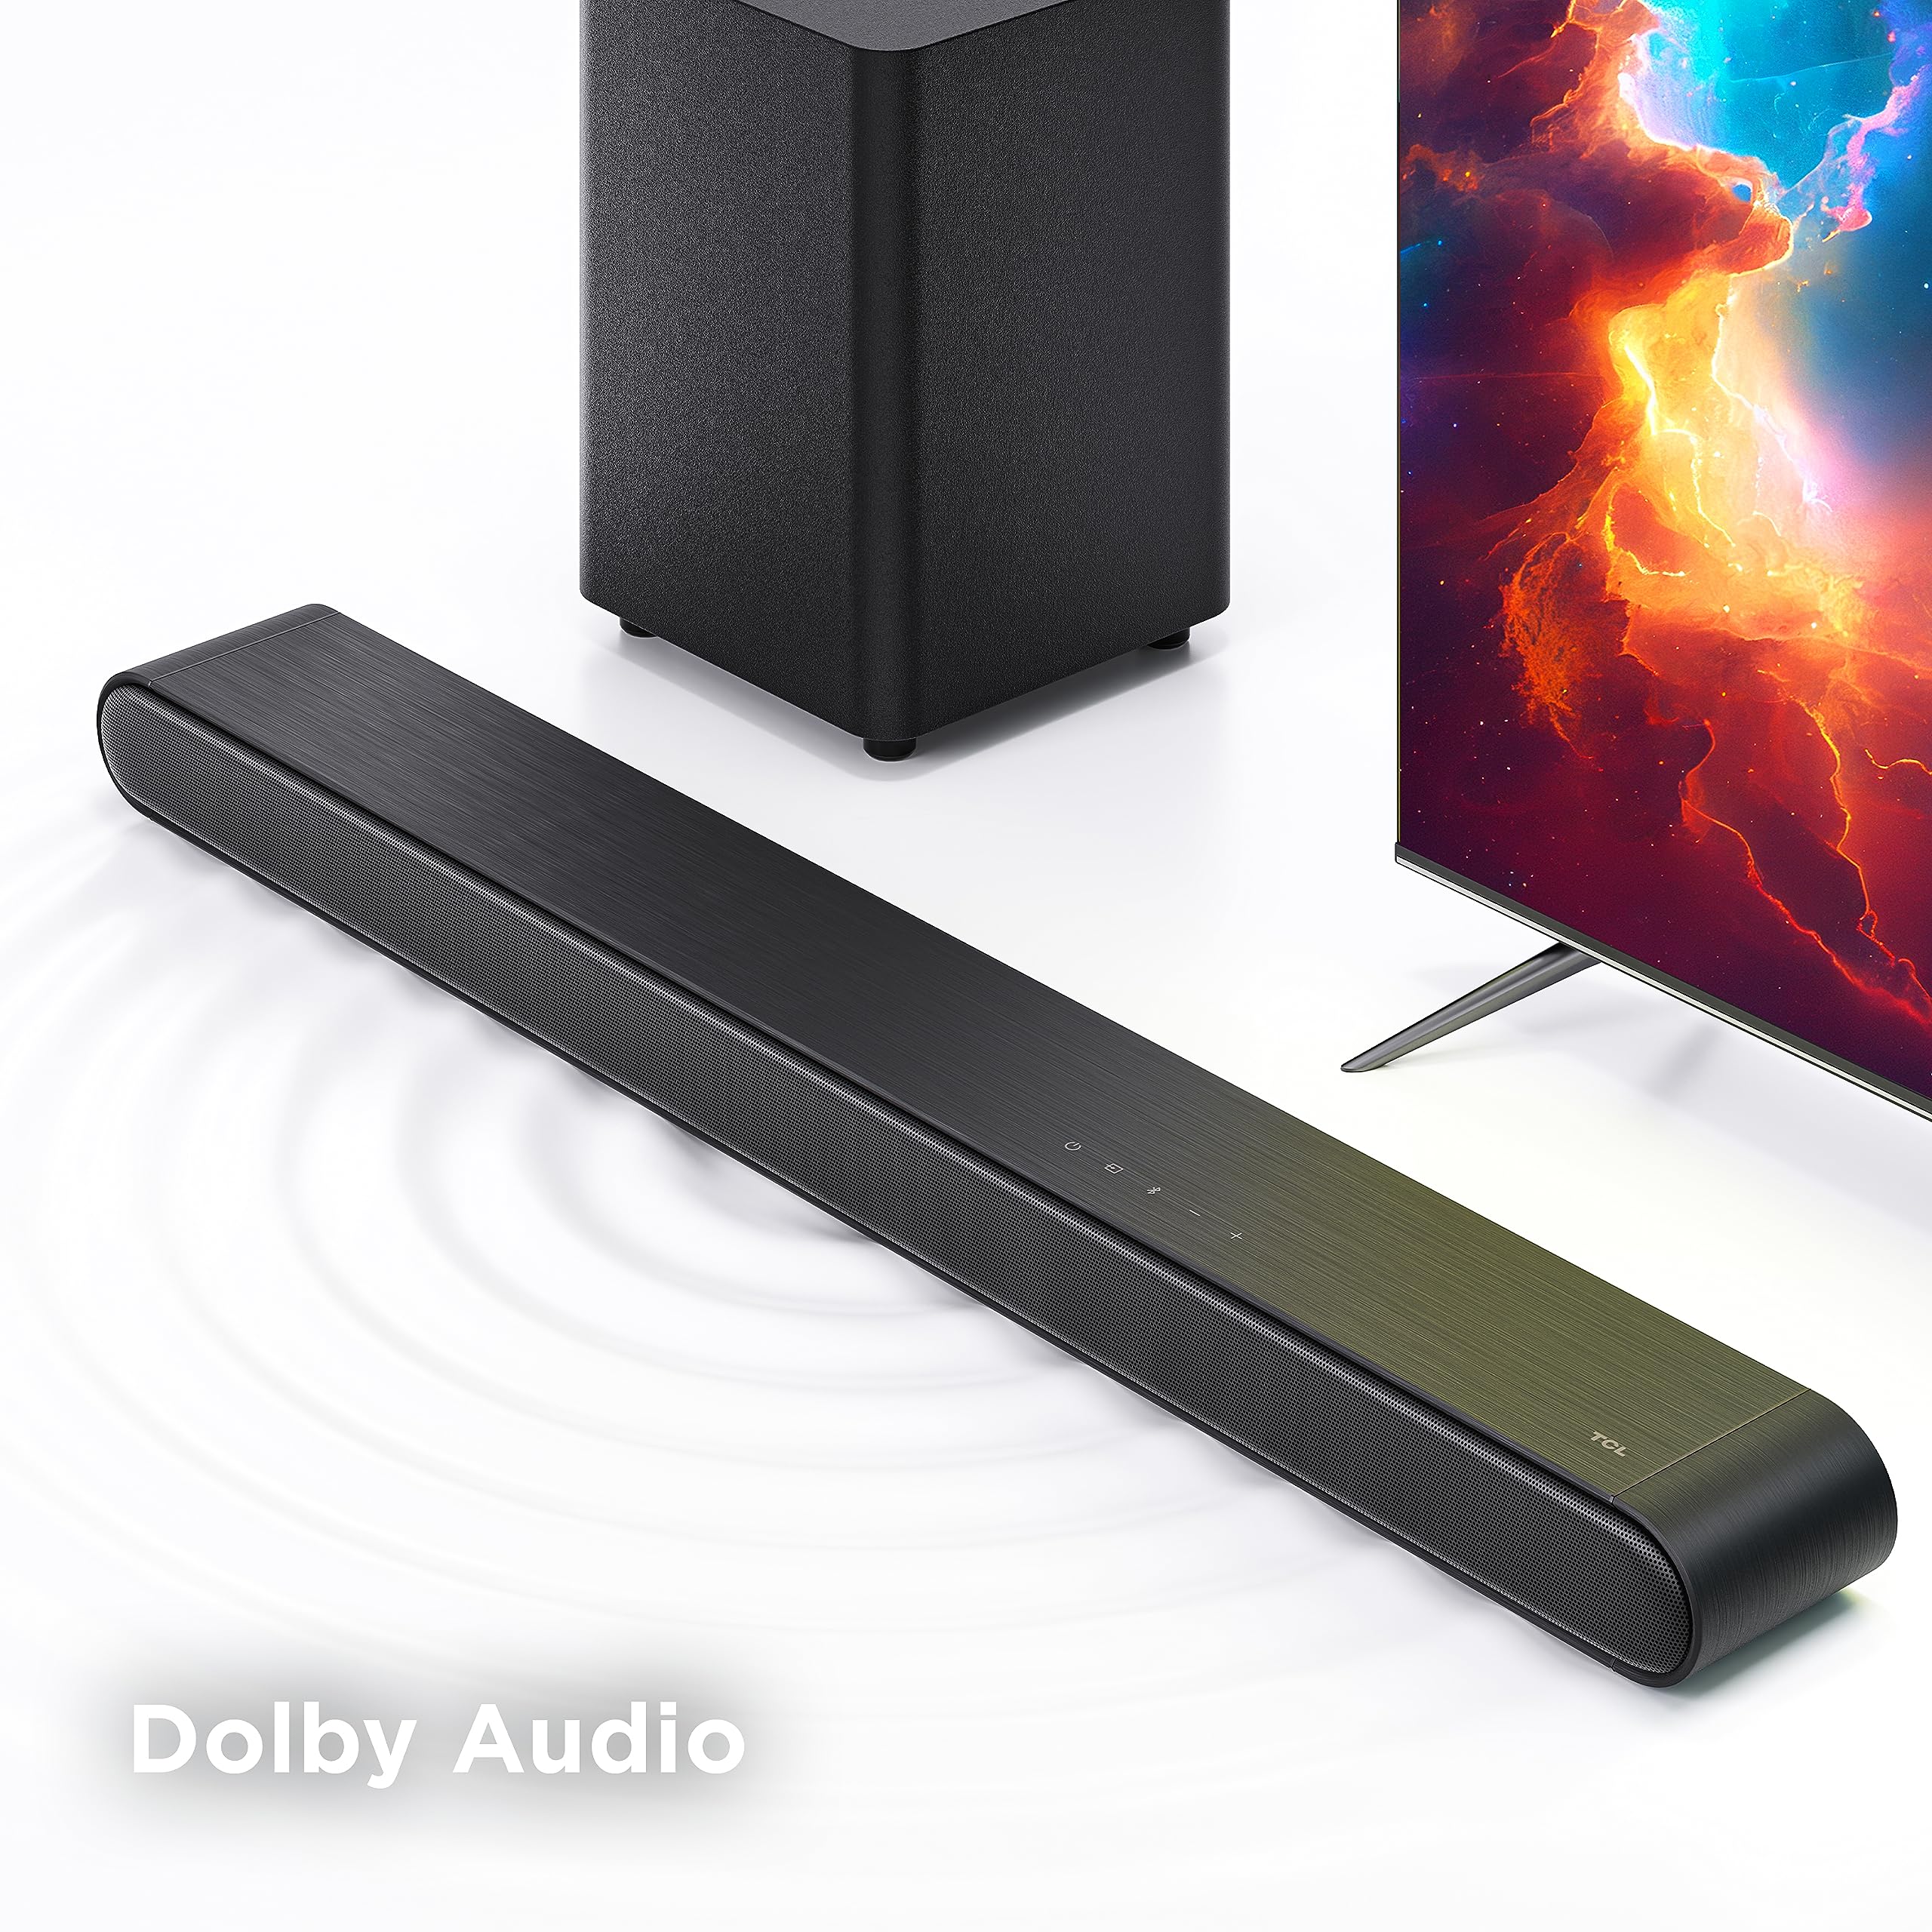 TCL 3.1ch Sound Bar with Wireless Subwoofer, (S4310, 2023 Model), Built-in Center Channel, Dolby Audio, DTS Virtual:X, Bluetooth, Wall Mount and HDMI Cable Included,Black